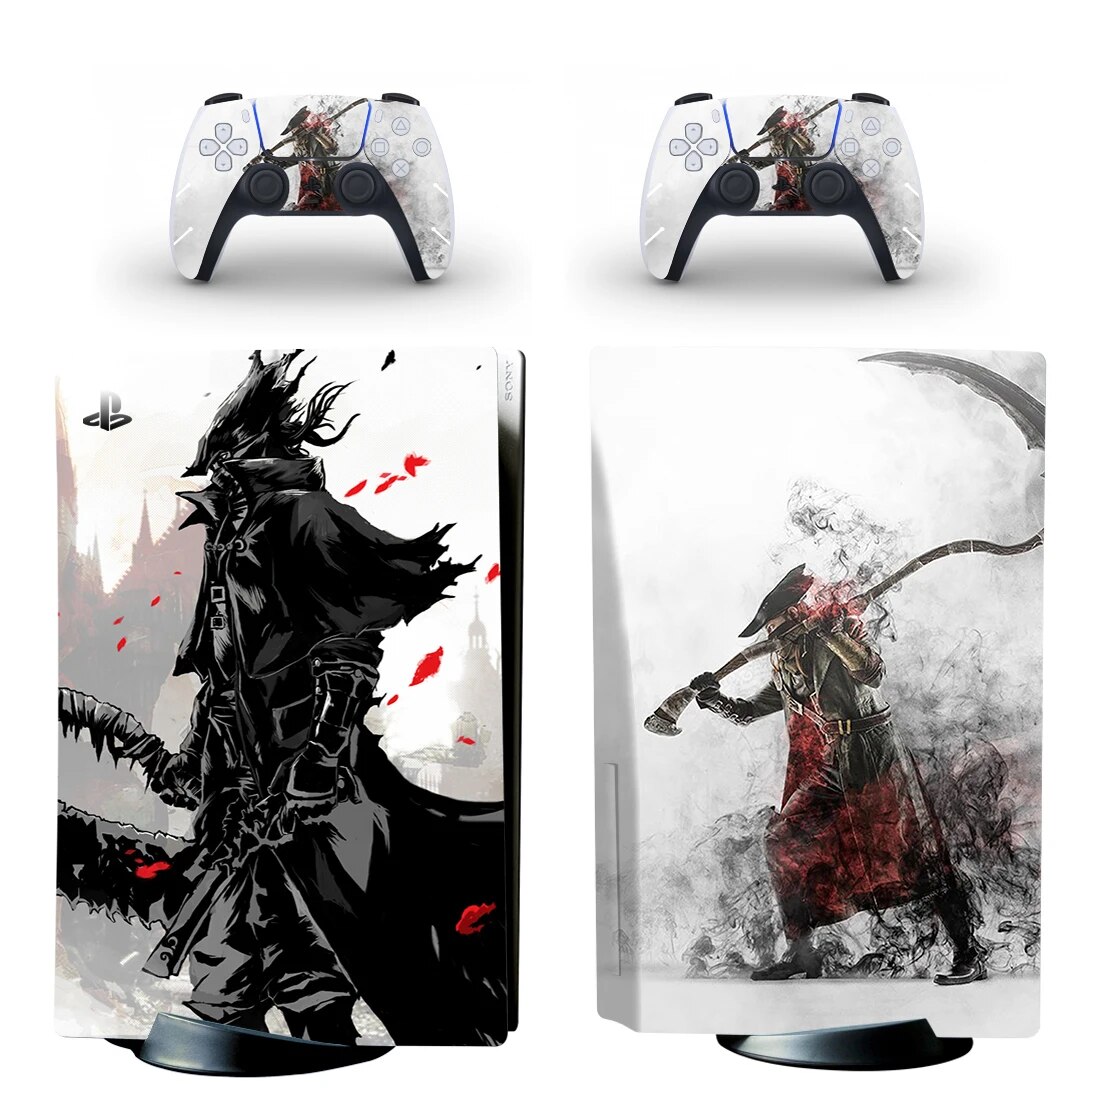 【In-demand】 Ps5 Standard Disc Edition Skin Sticker Decal Cover For 5 Console And 2 Controllers Ps5 Skin Sticker